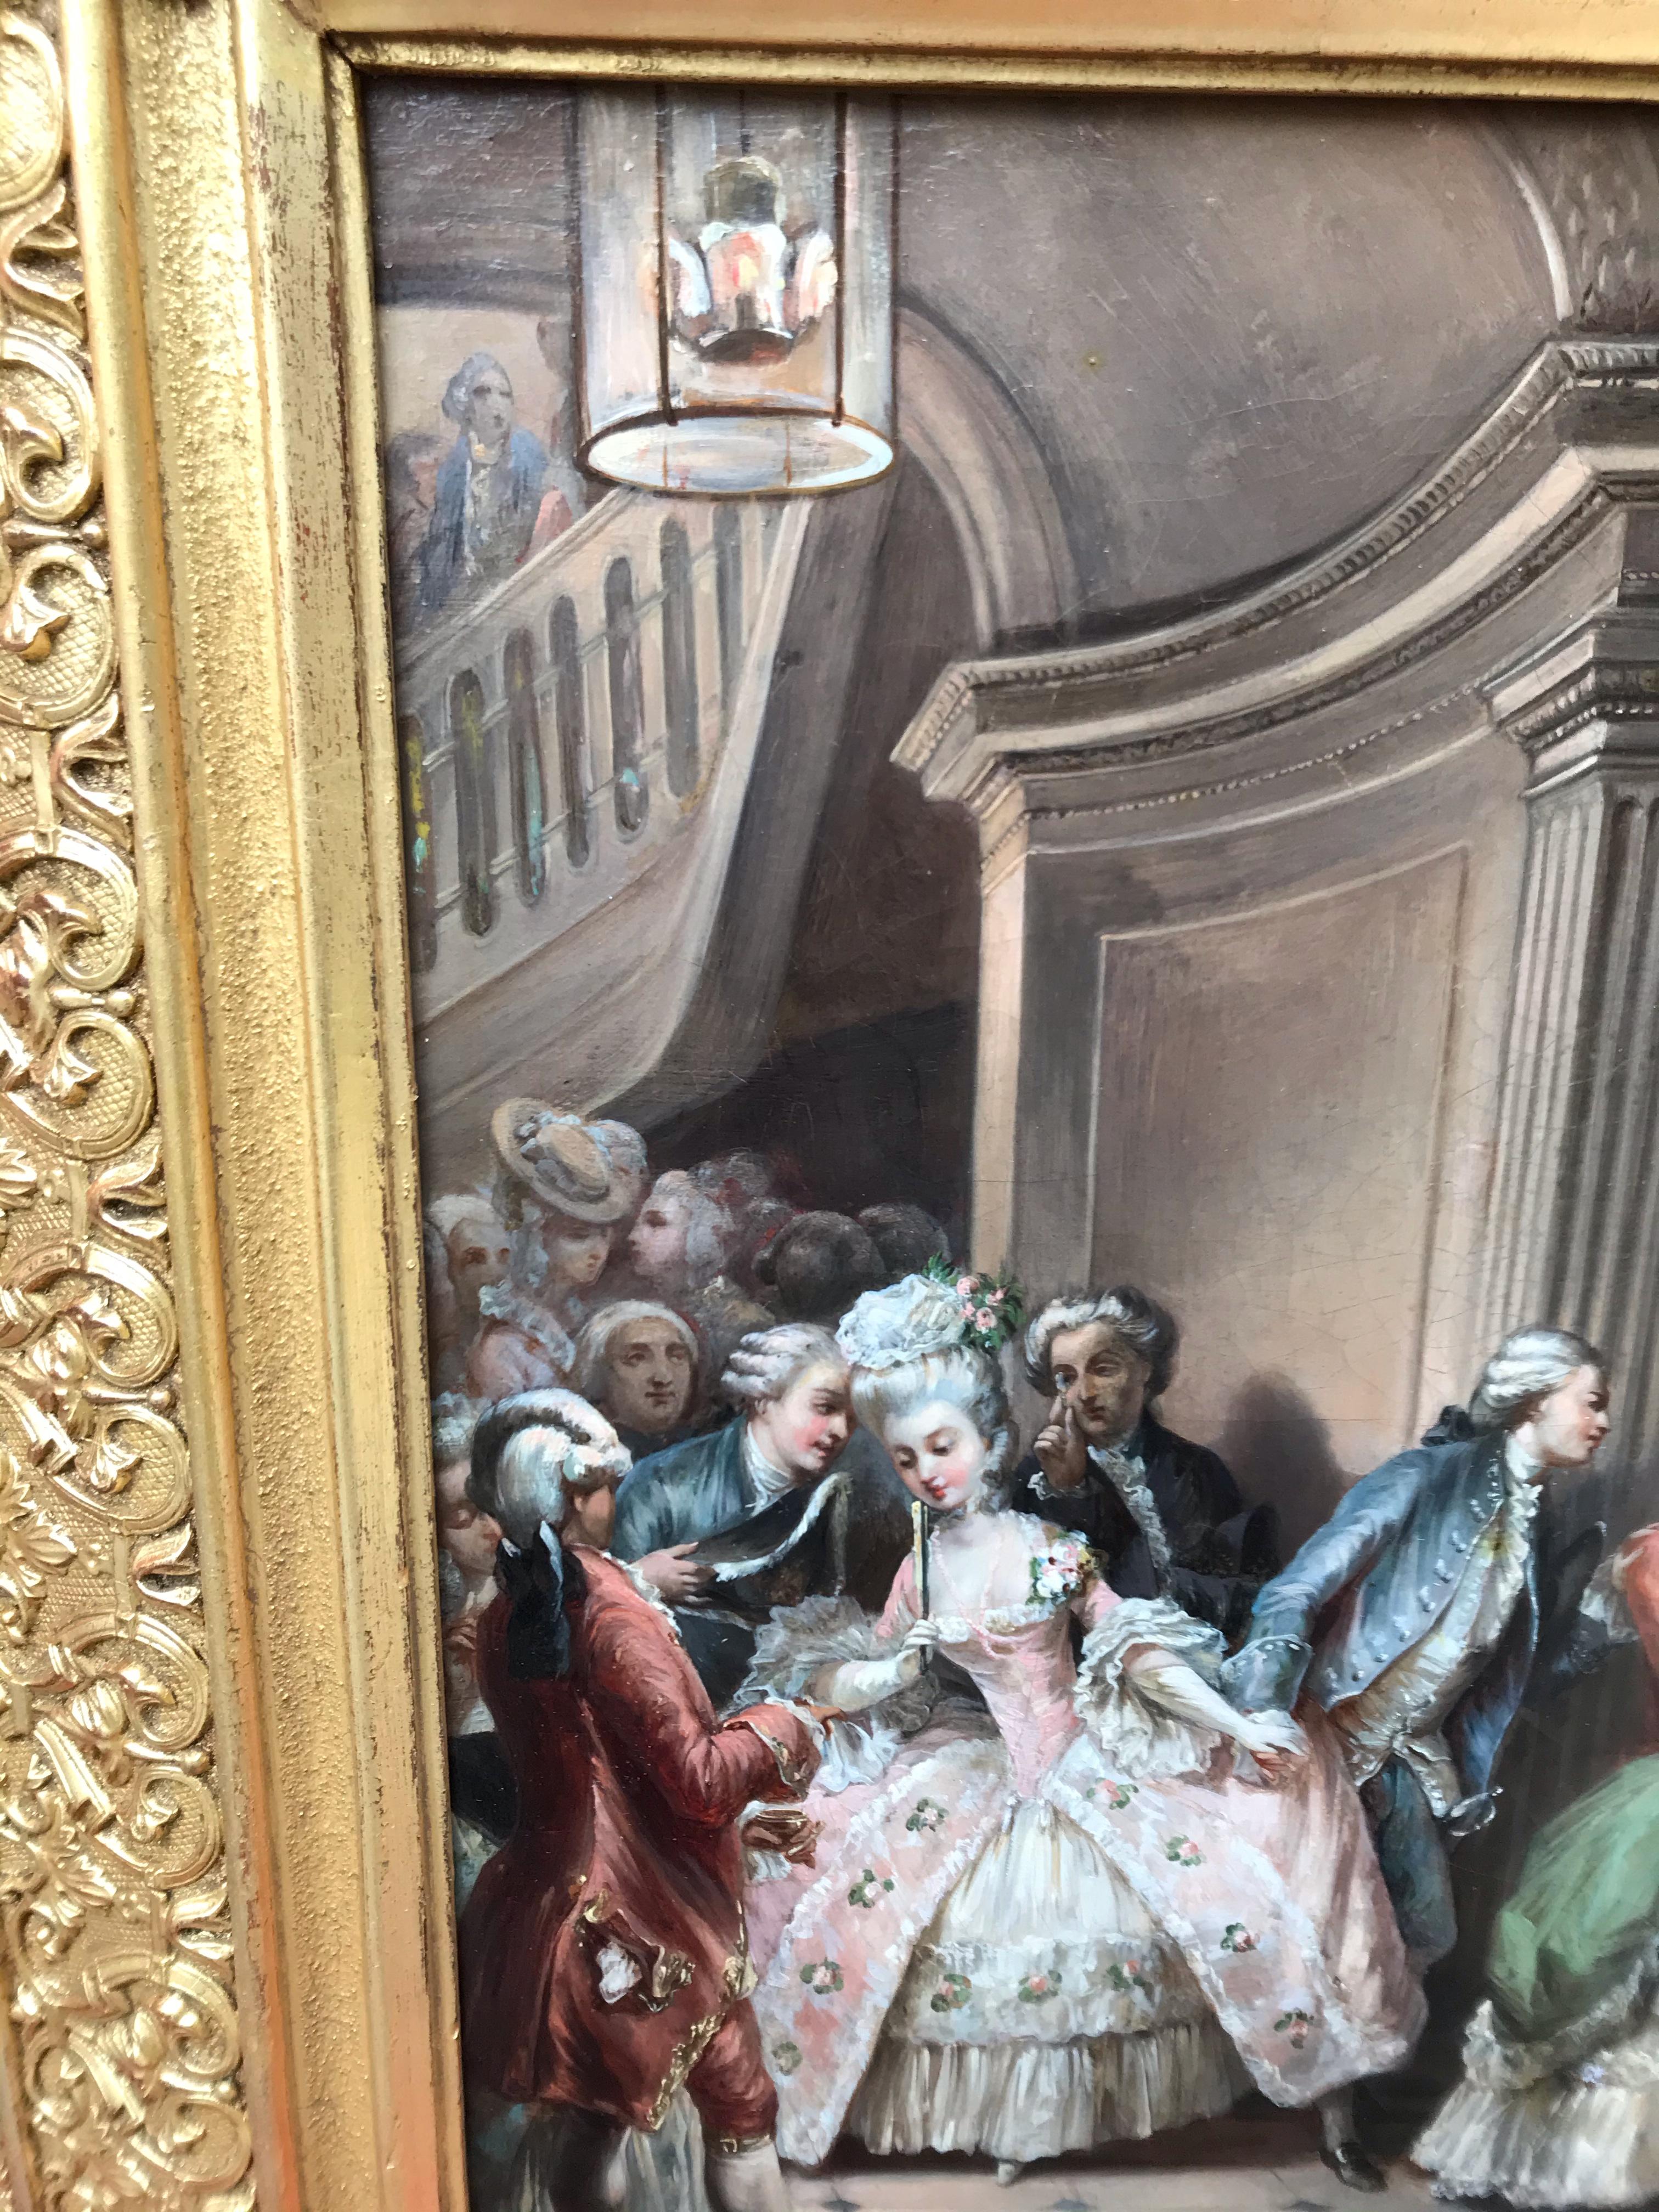 A Party To The Castle in the 18th Century
Oil on canvas with a signature G.Weiss low left
Old frame regilded
Dim canvas : 46 X 38 cm
Dim frame : 66 X 58 cm

